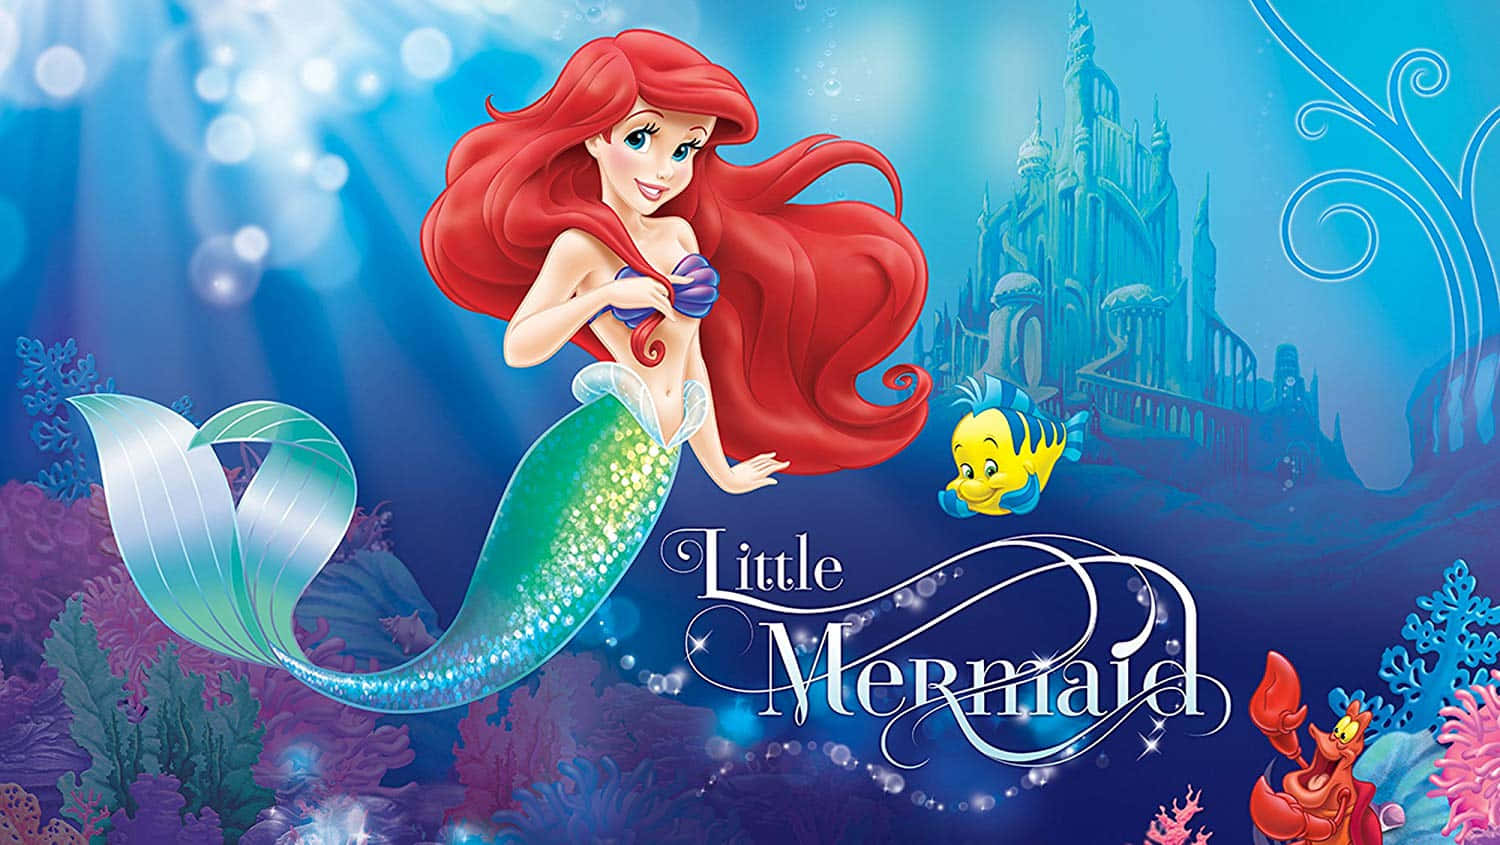 "Under the sea, life is better with a Little Mermaid" Wallpaper